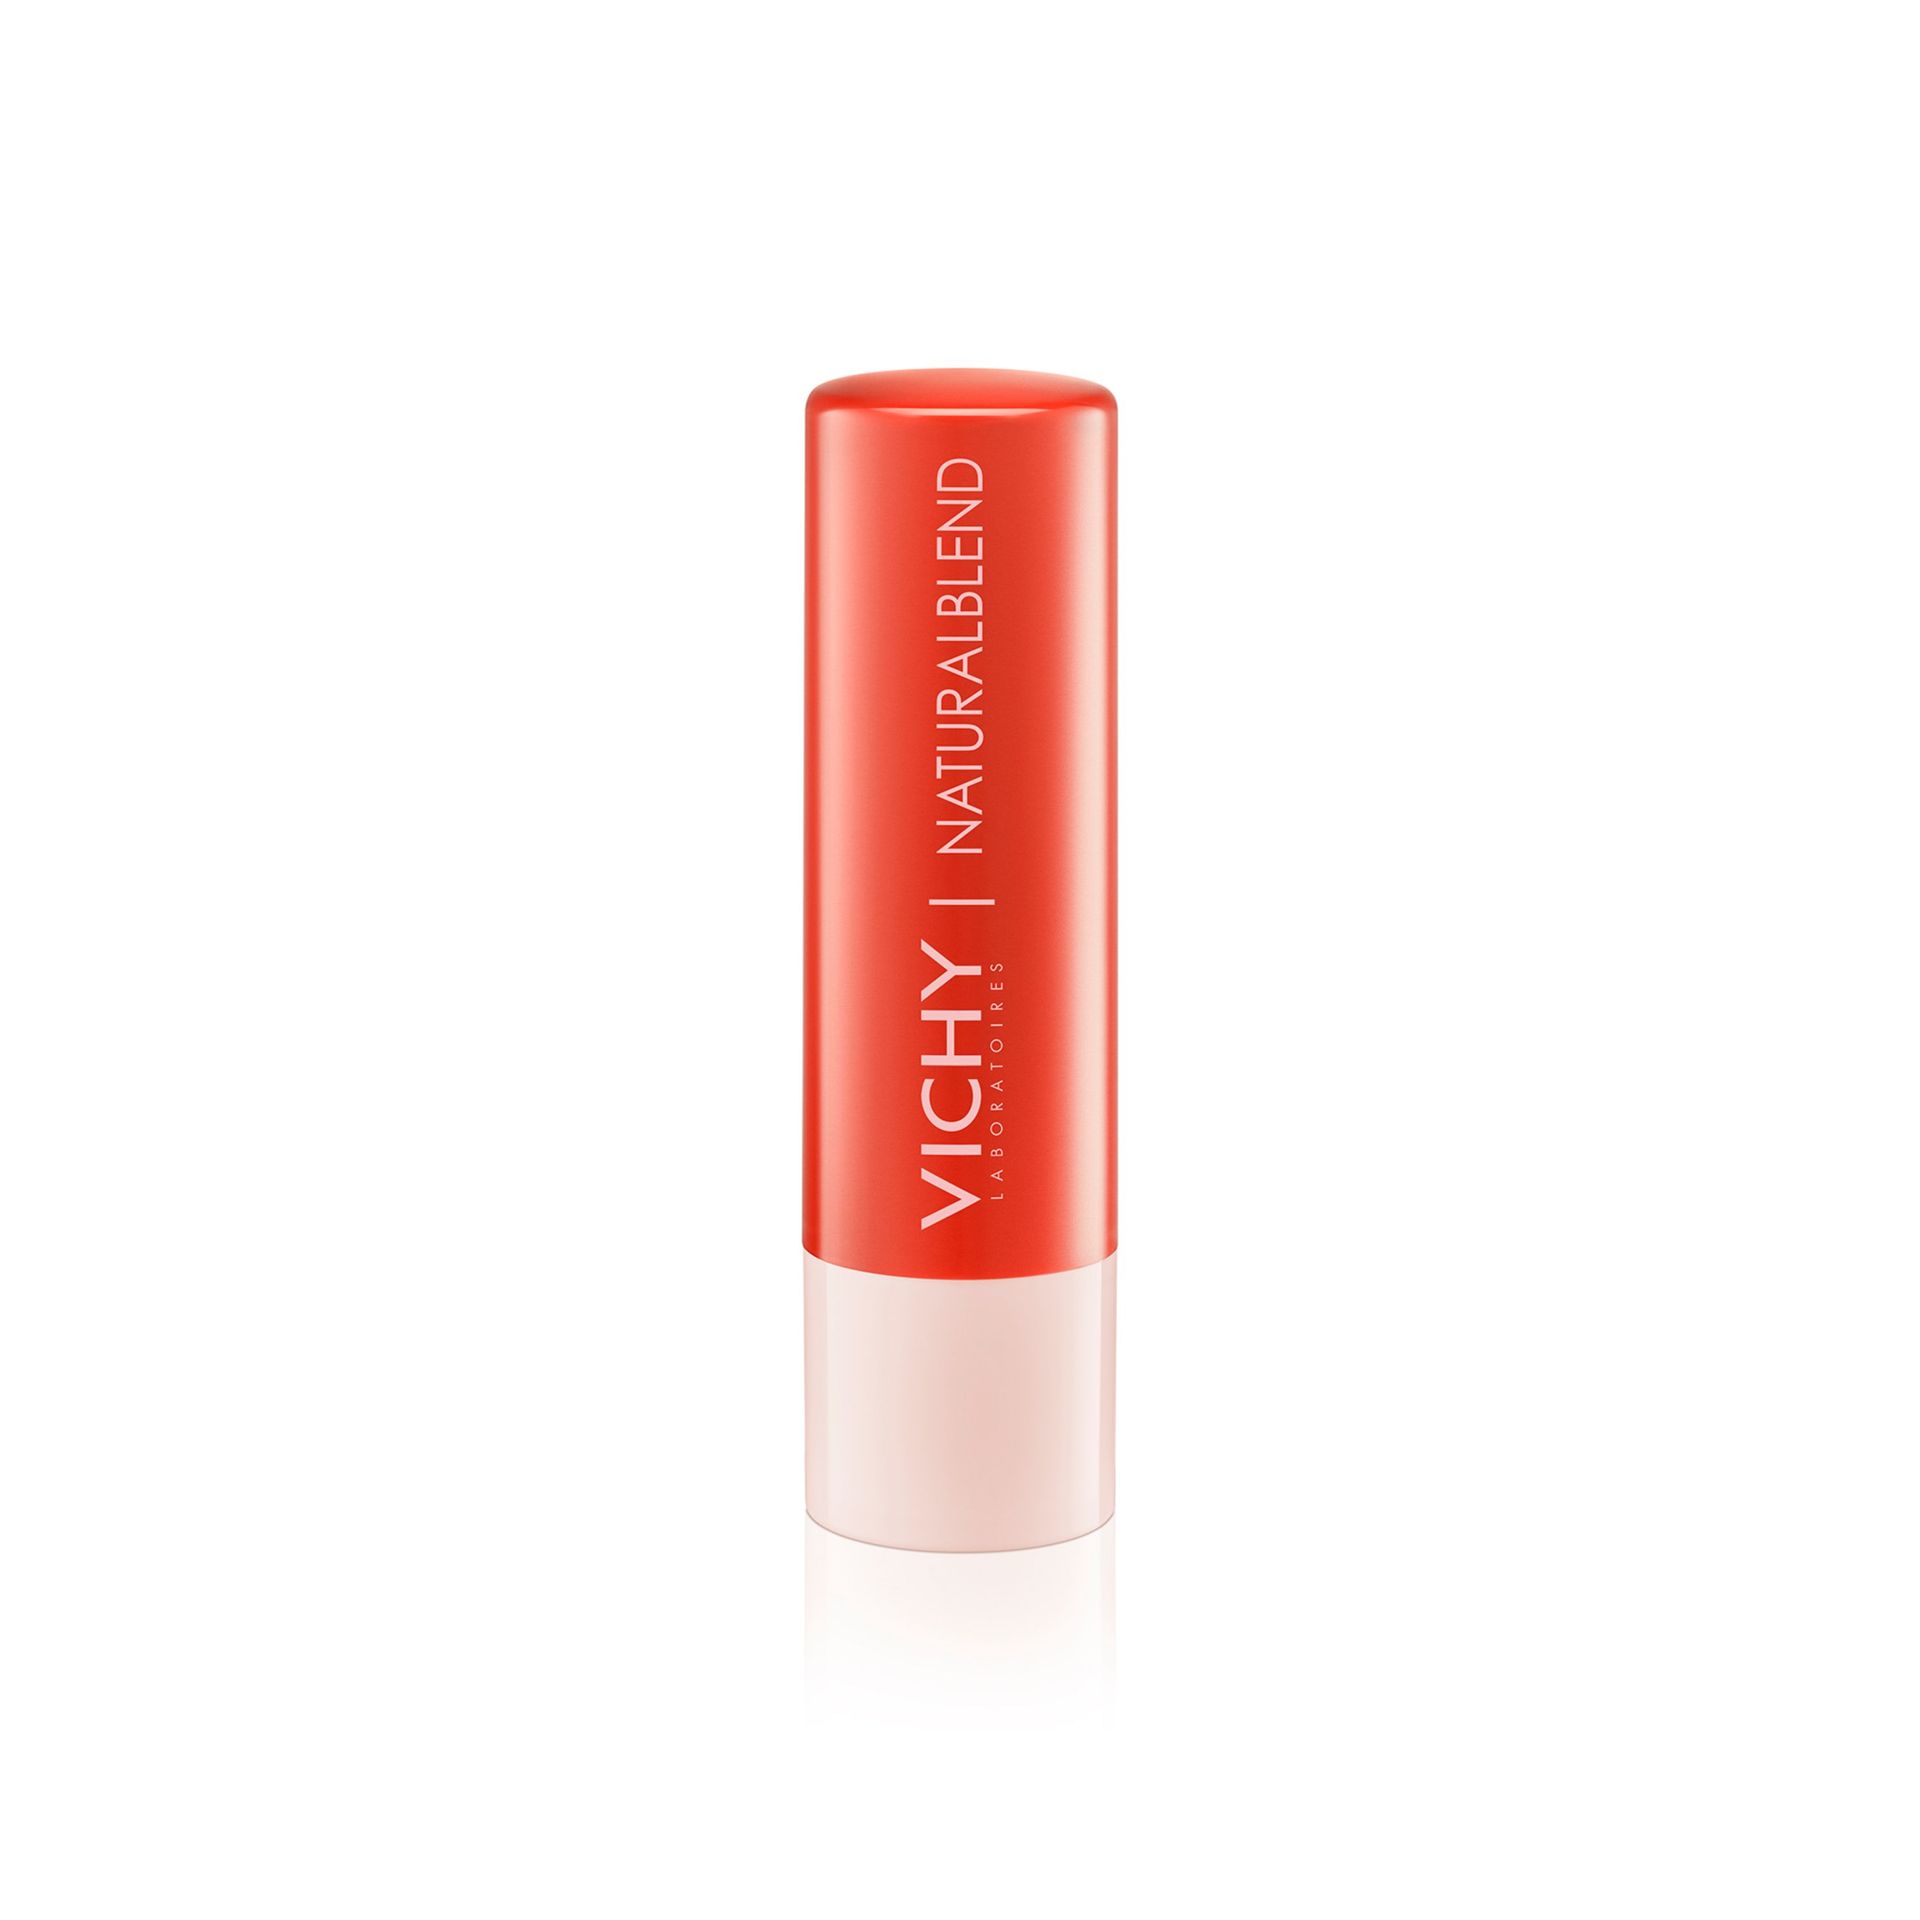 Vichy Naturalblend balsam do ust odcień Coral 4,5 g